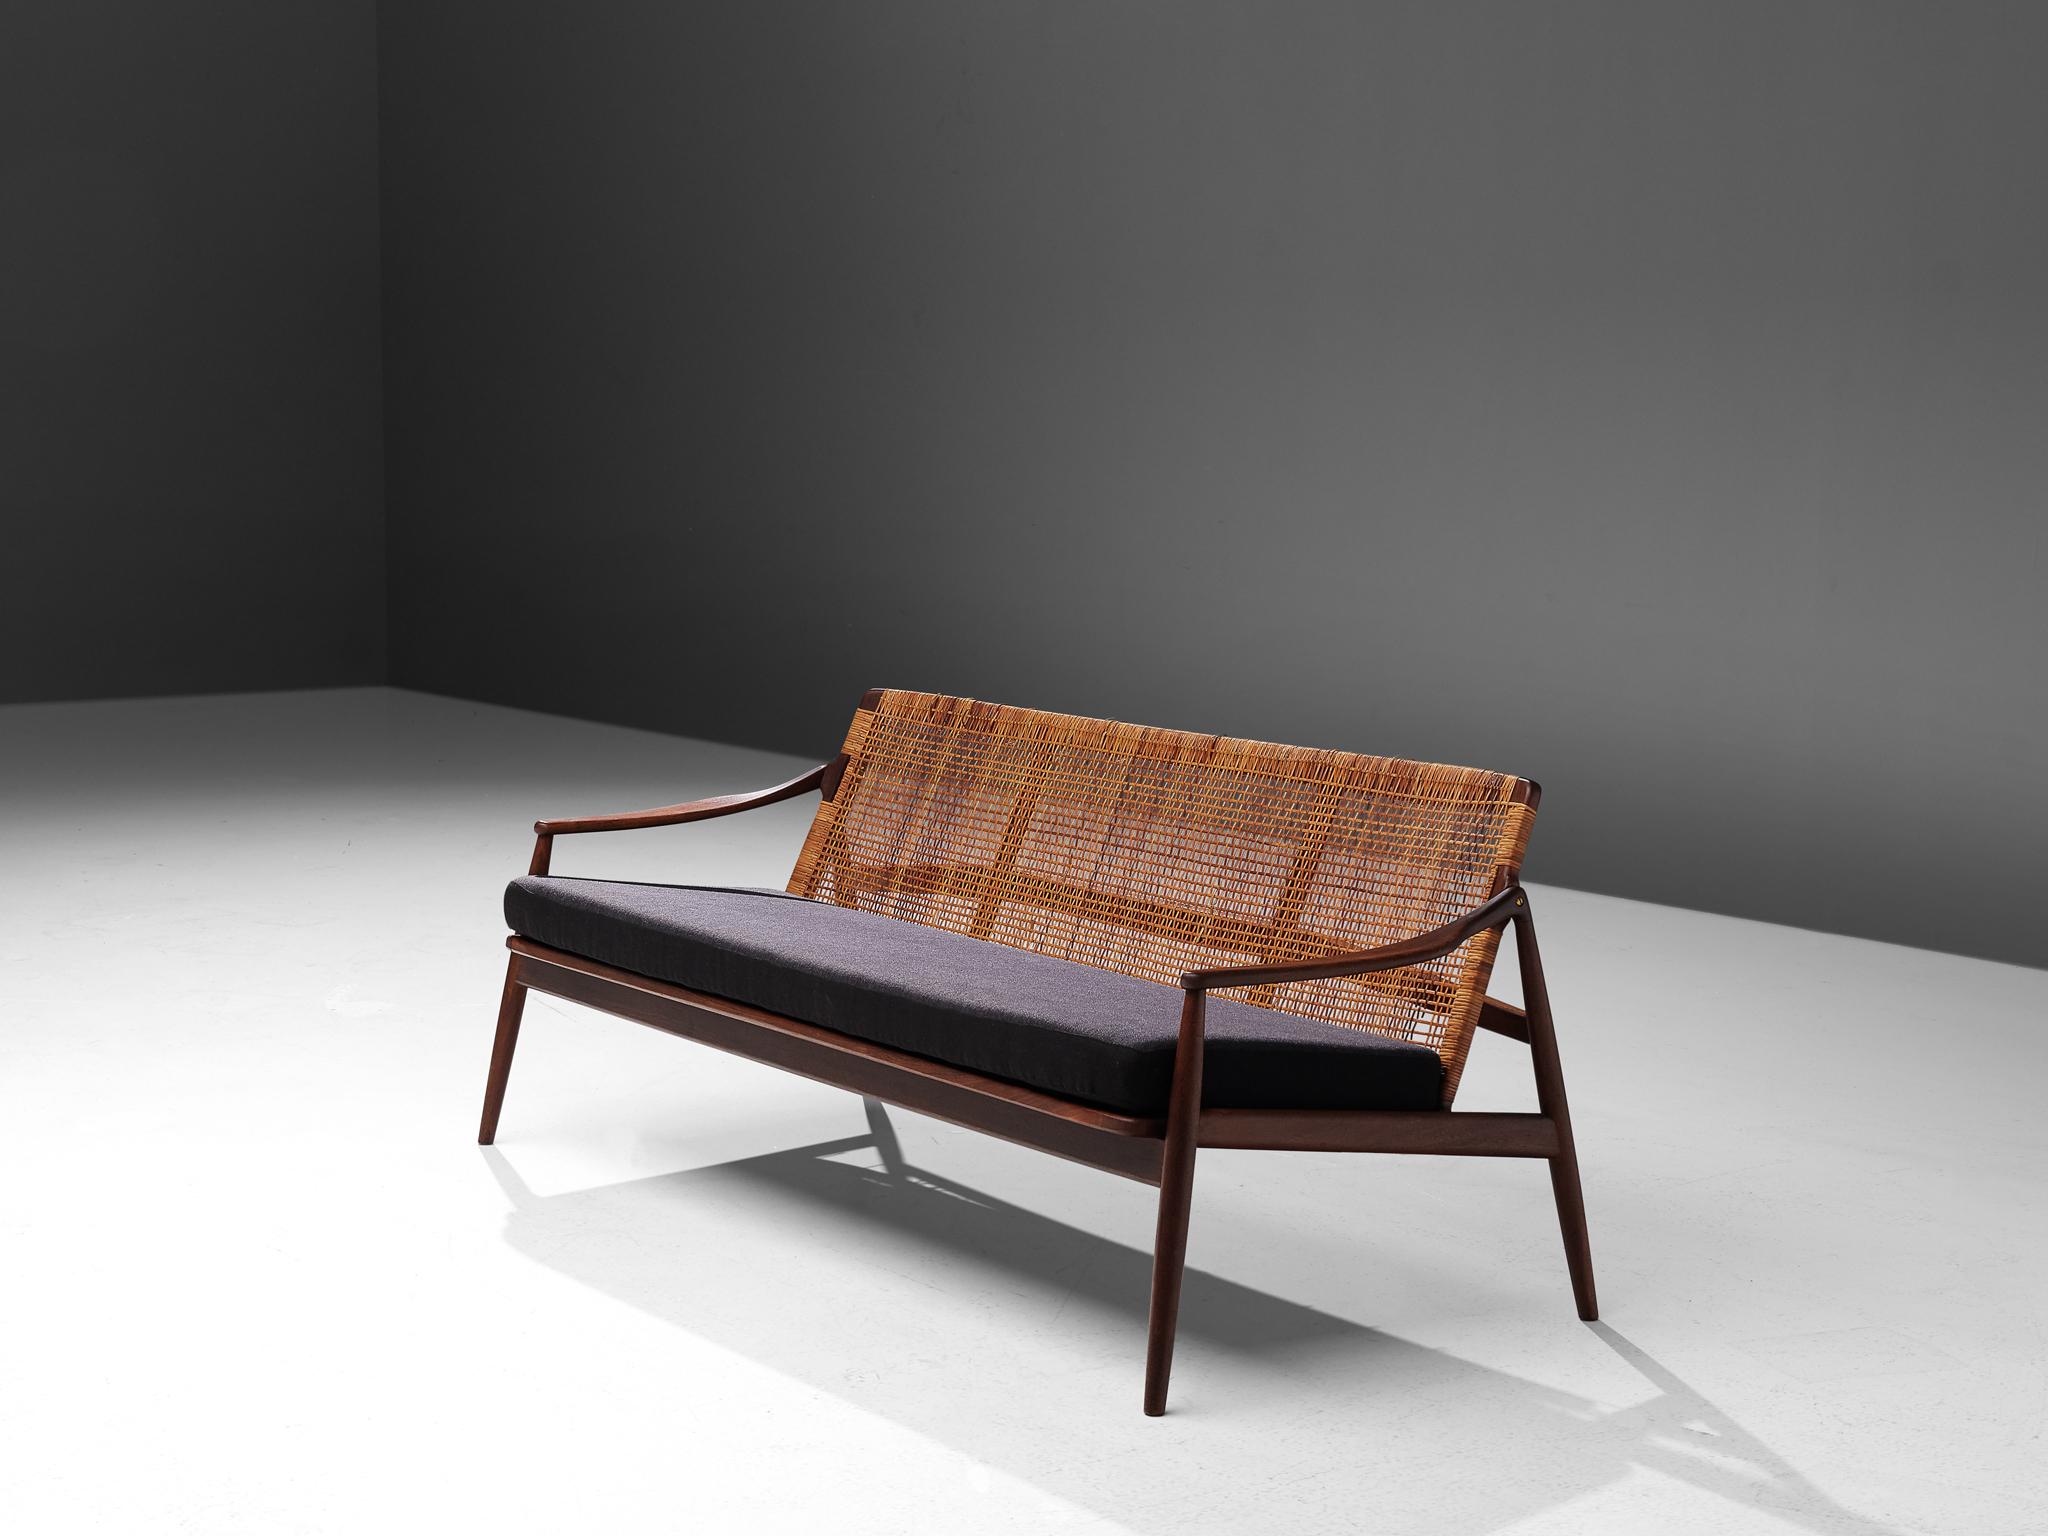 Hartmut Lohmeyer for Wilkhahn, sofa, fabric, teak and rattan, Germany, 1956

The sofa-bench is sensuous and organically shaped. It features a slightly tilted back and is executed with tapered legs. The softly bent armrests and open frame create a